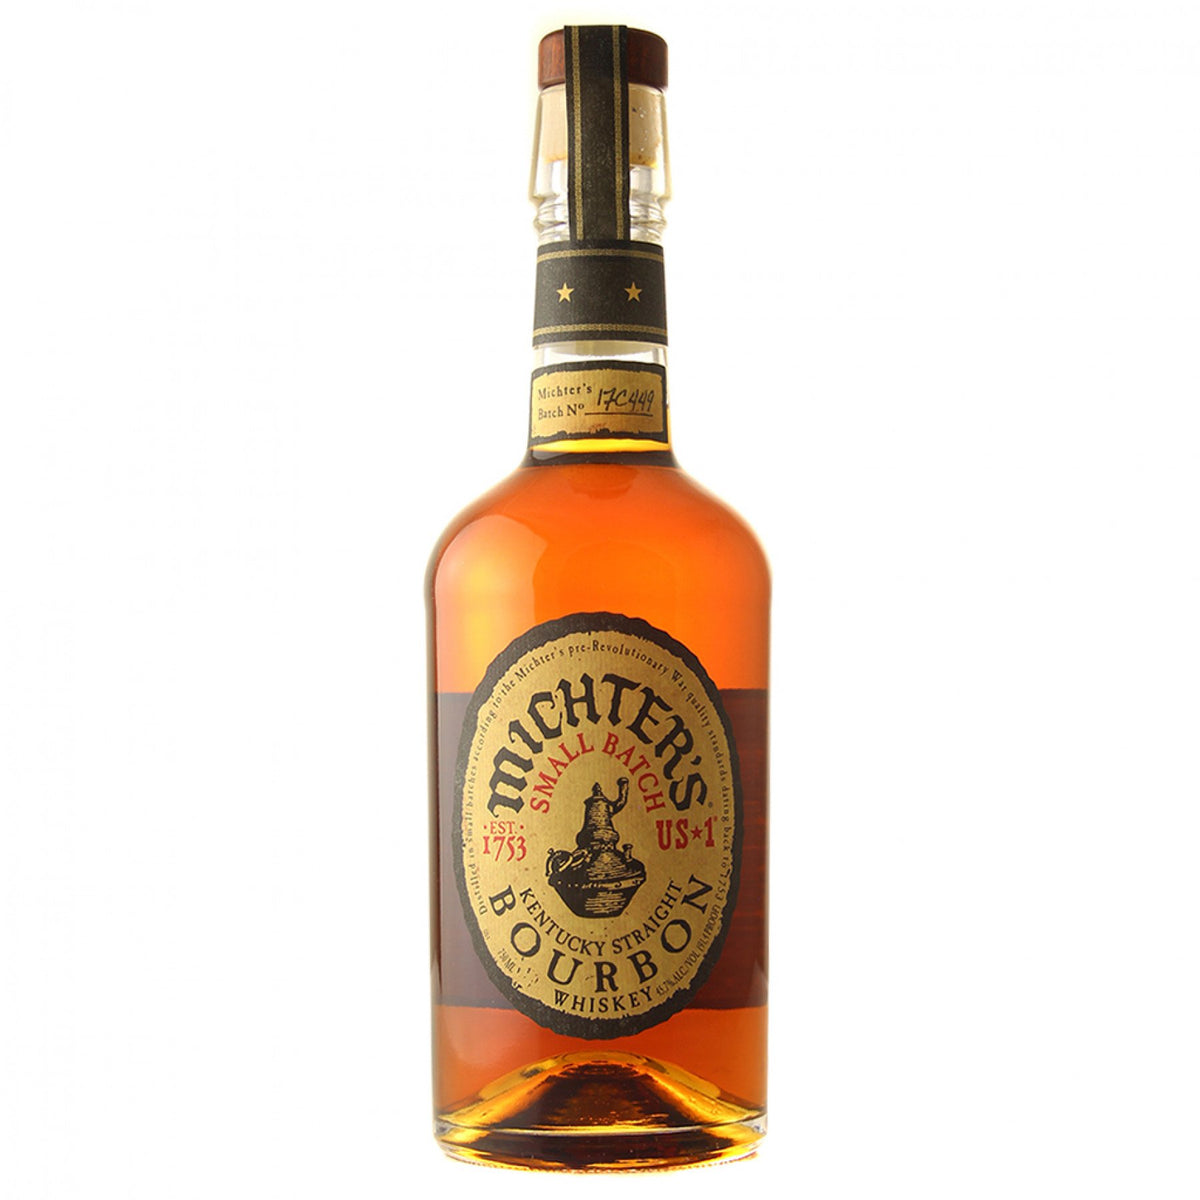 Micther's Michter's Small Batch Bourbon Whiskey Whiskey